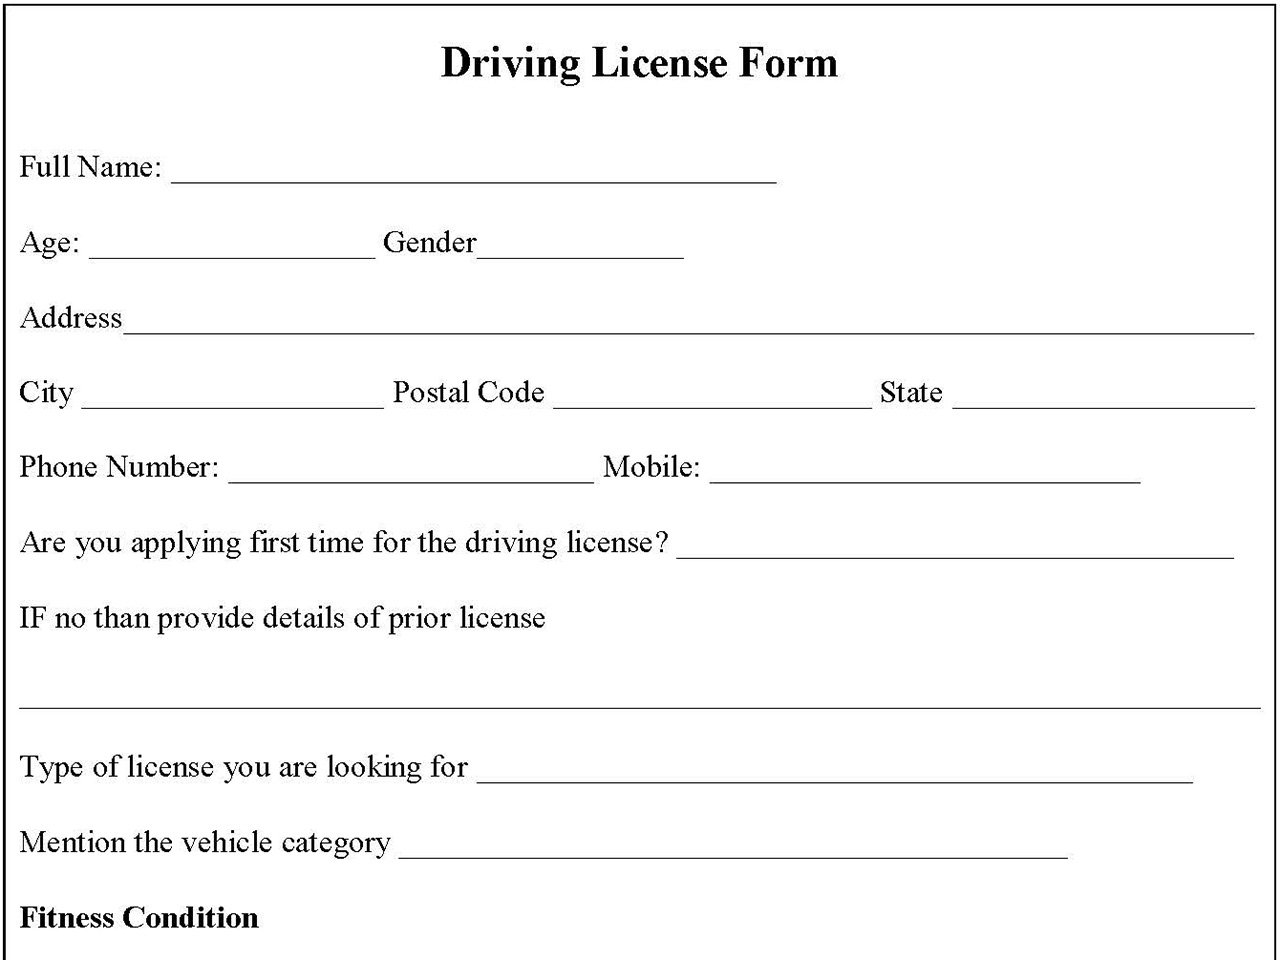 Driving License Form